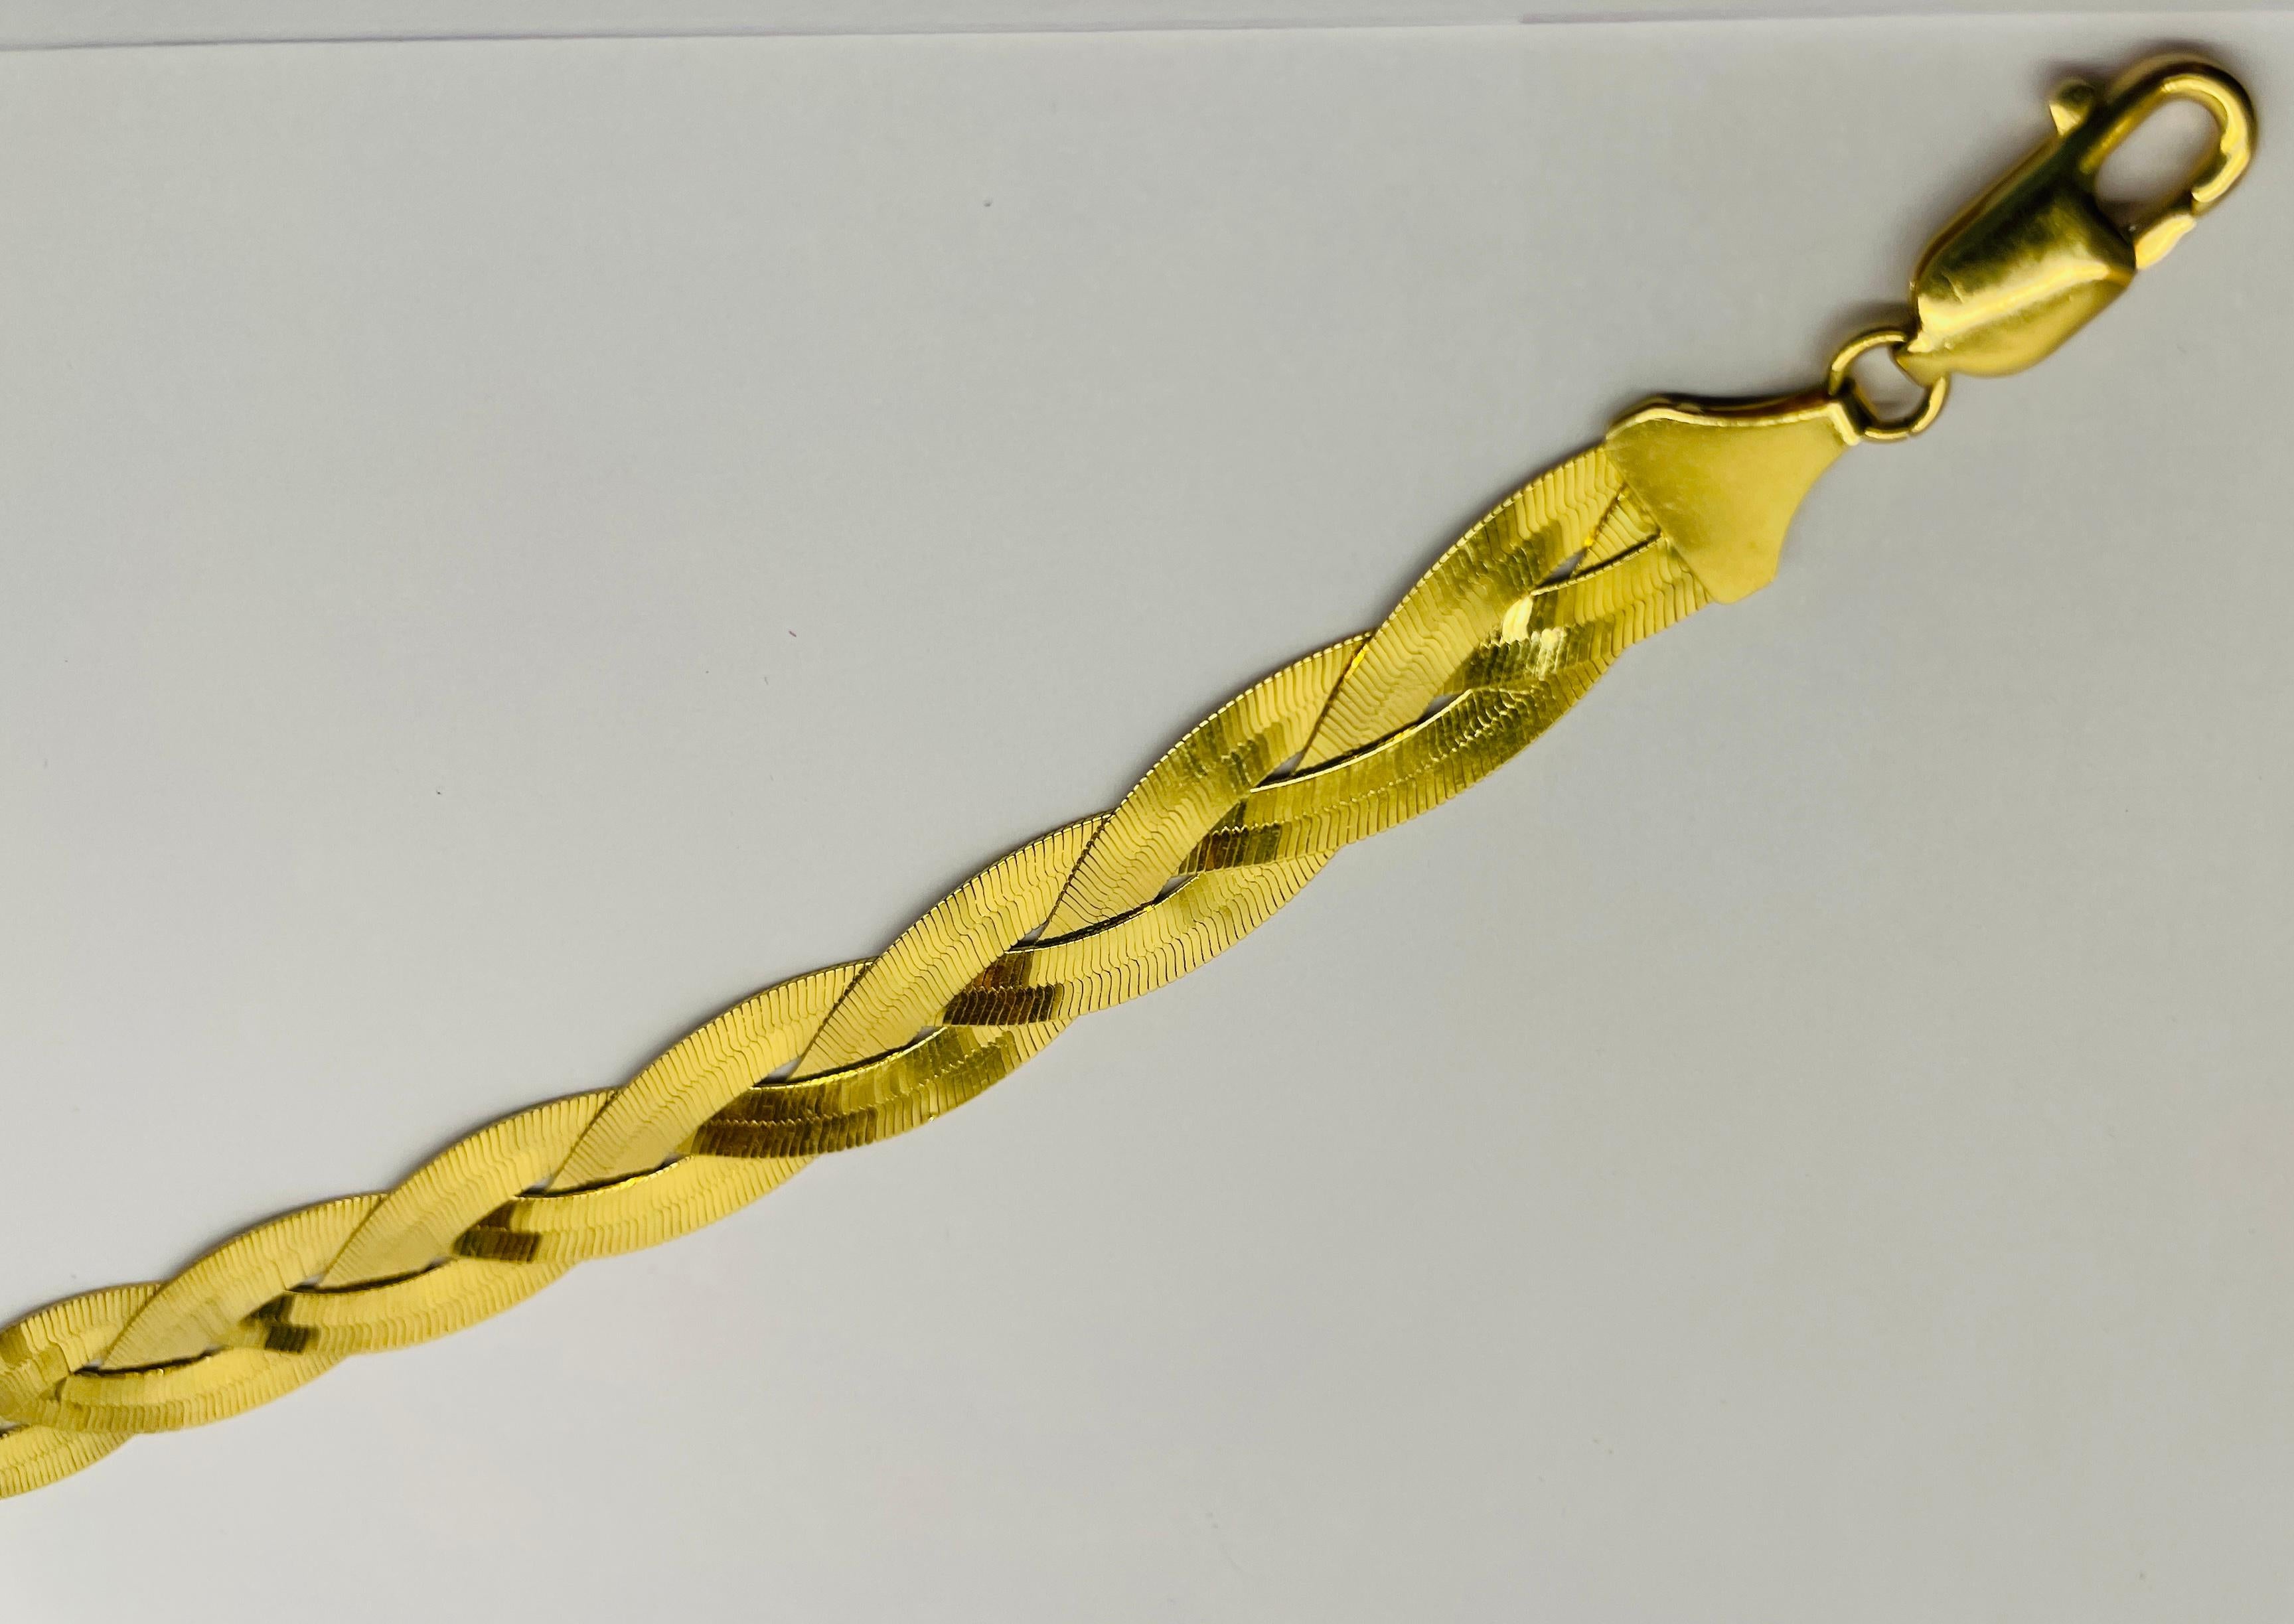 18 karat Bracelet Two Tone Yellow and white gold Braided Reversible French In Good Condition For Sale In North Hollywood, CA